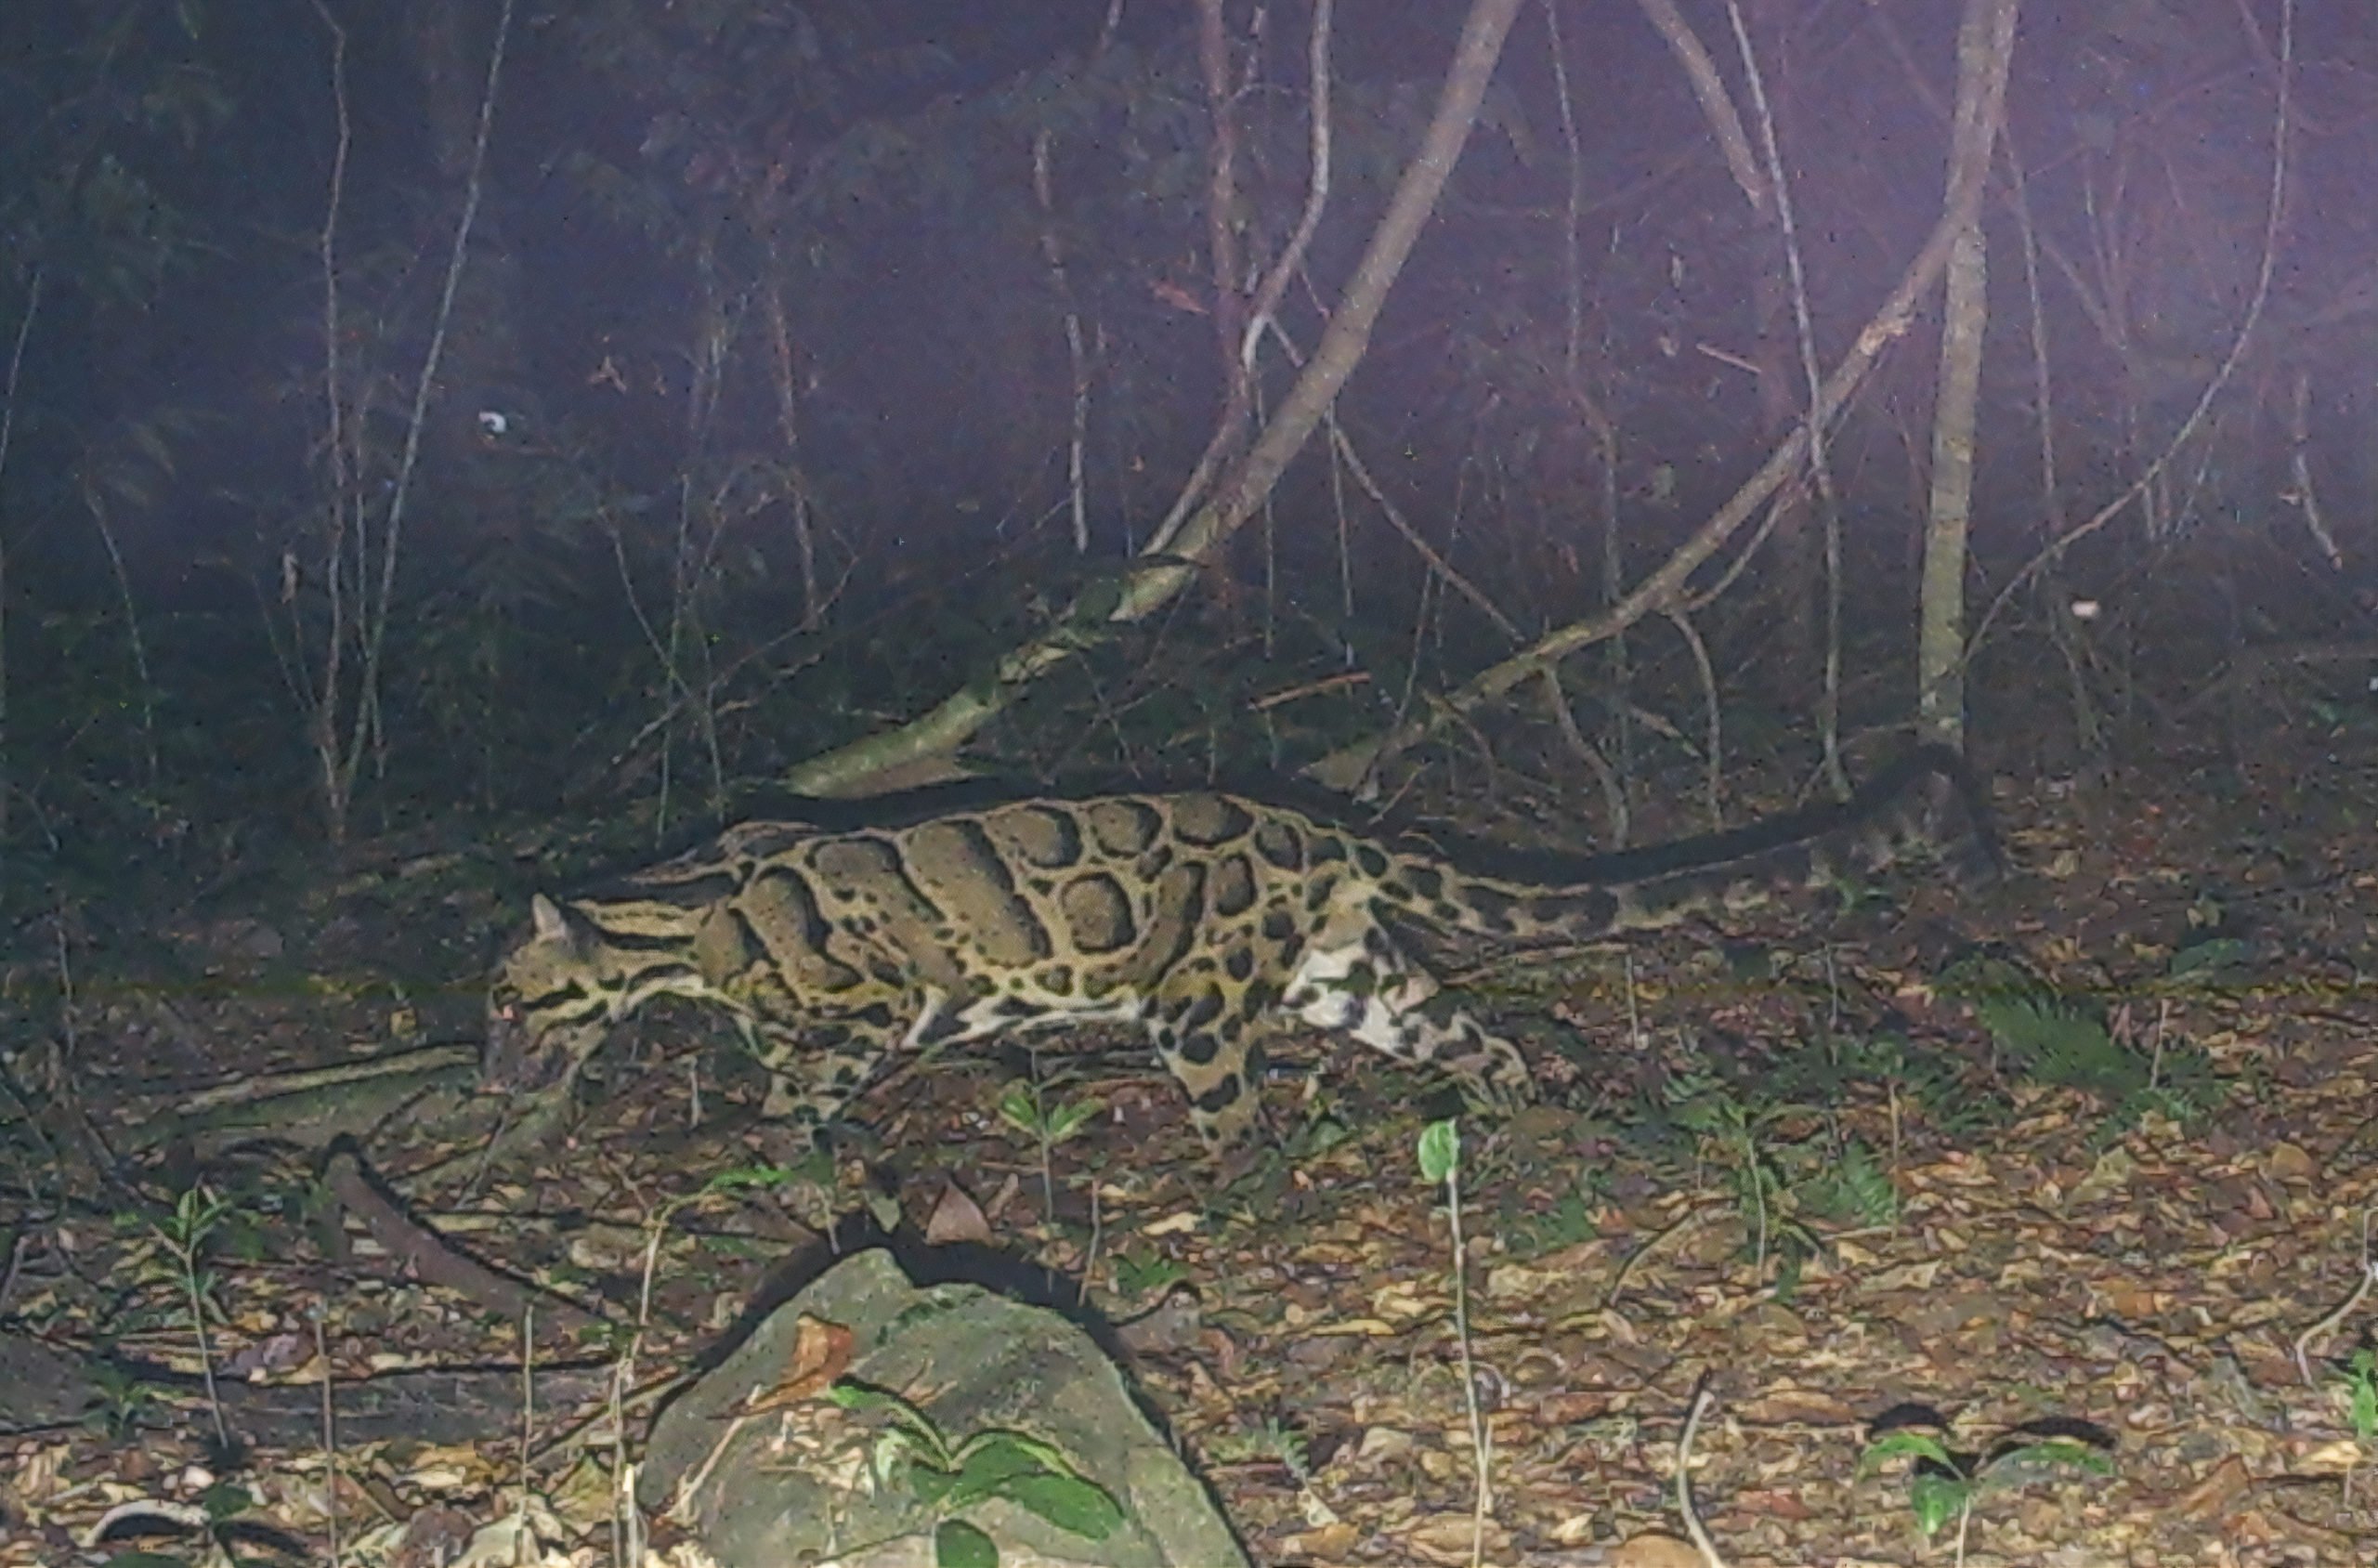 Clouded leopard with a kinked tail